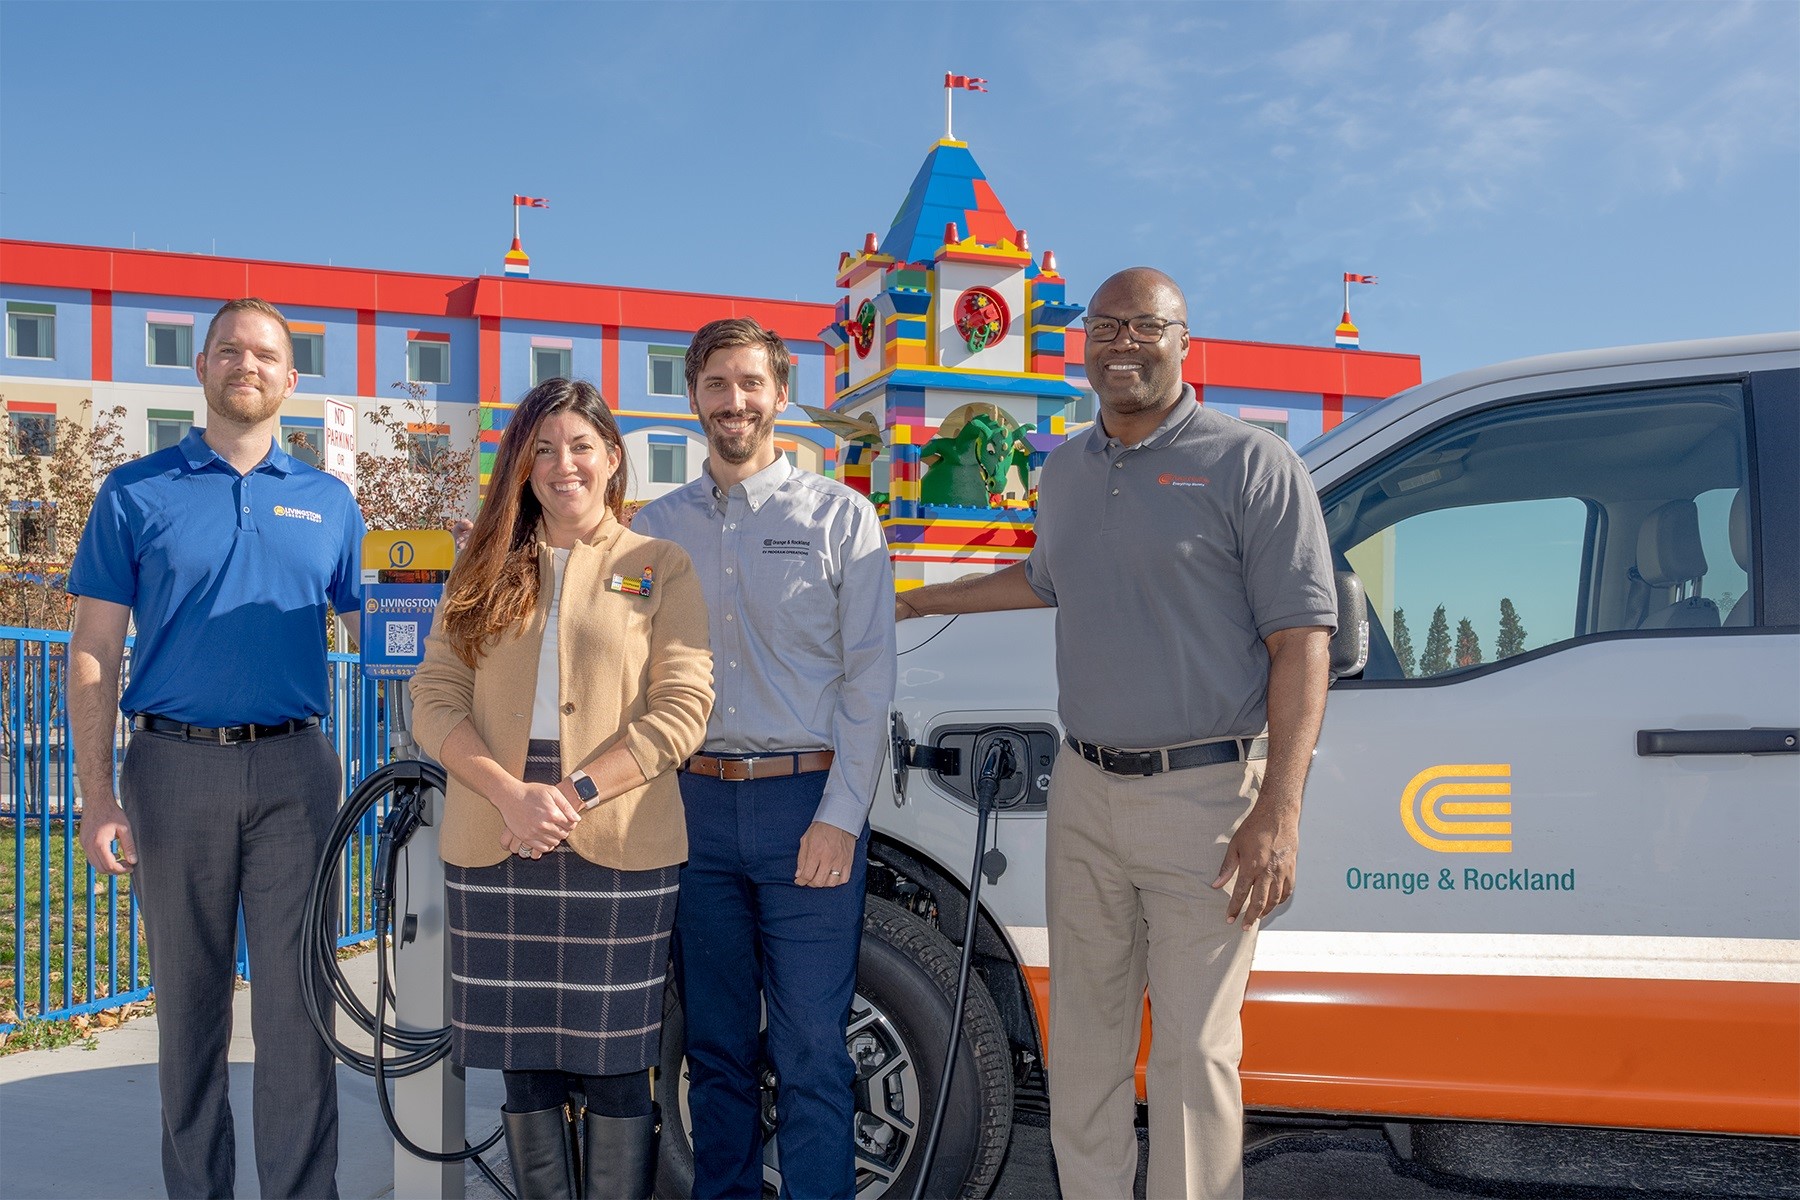 Tom Mittler, Communications Manager for Livingston Energy Group; Stephanie Johnson, LEGOLAND New York Divisional Director; Andrew Farrell, Section Manager of Orange & Rockland’s Electric Vehicle Programs and Orville Cocking, Vice President – Operations at Orange & Rockland trying out the new charger on one of O&R’s electric vehicles.